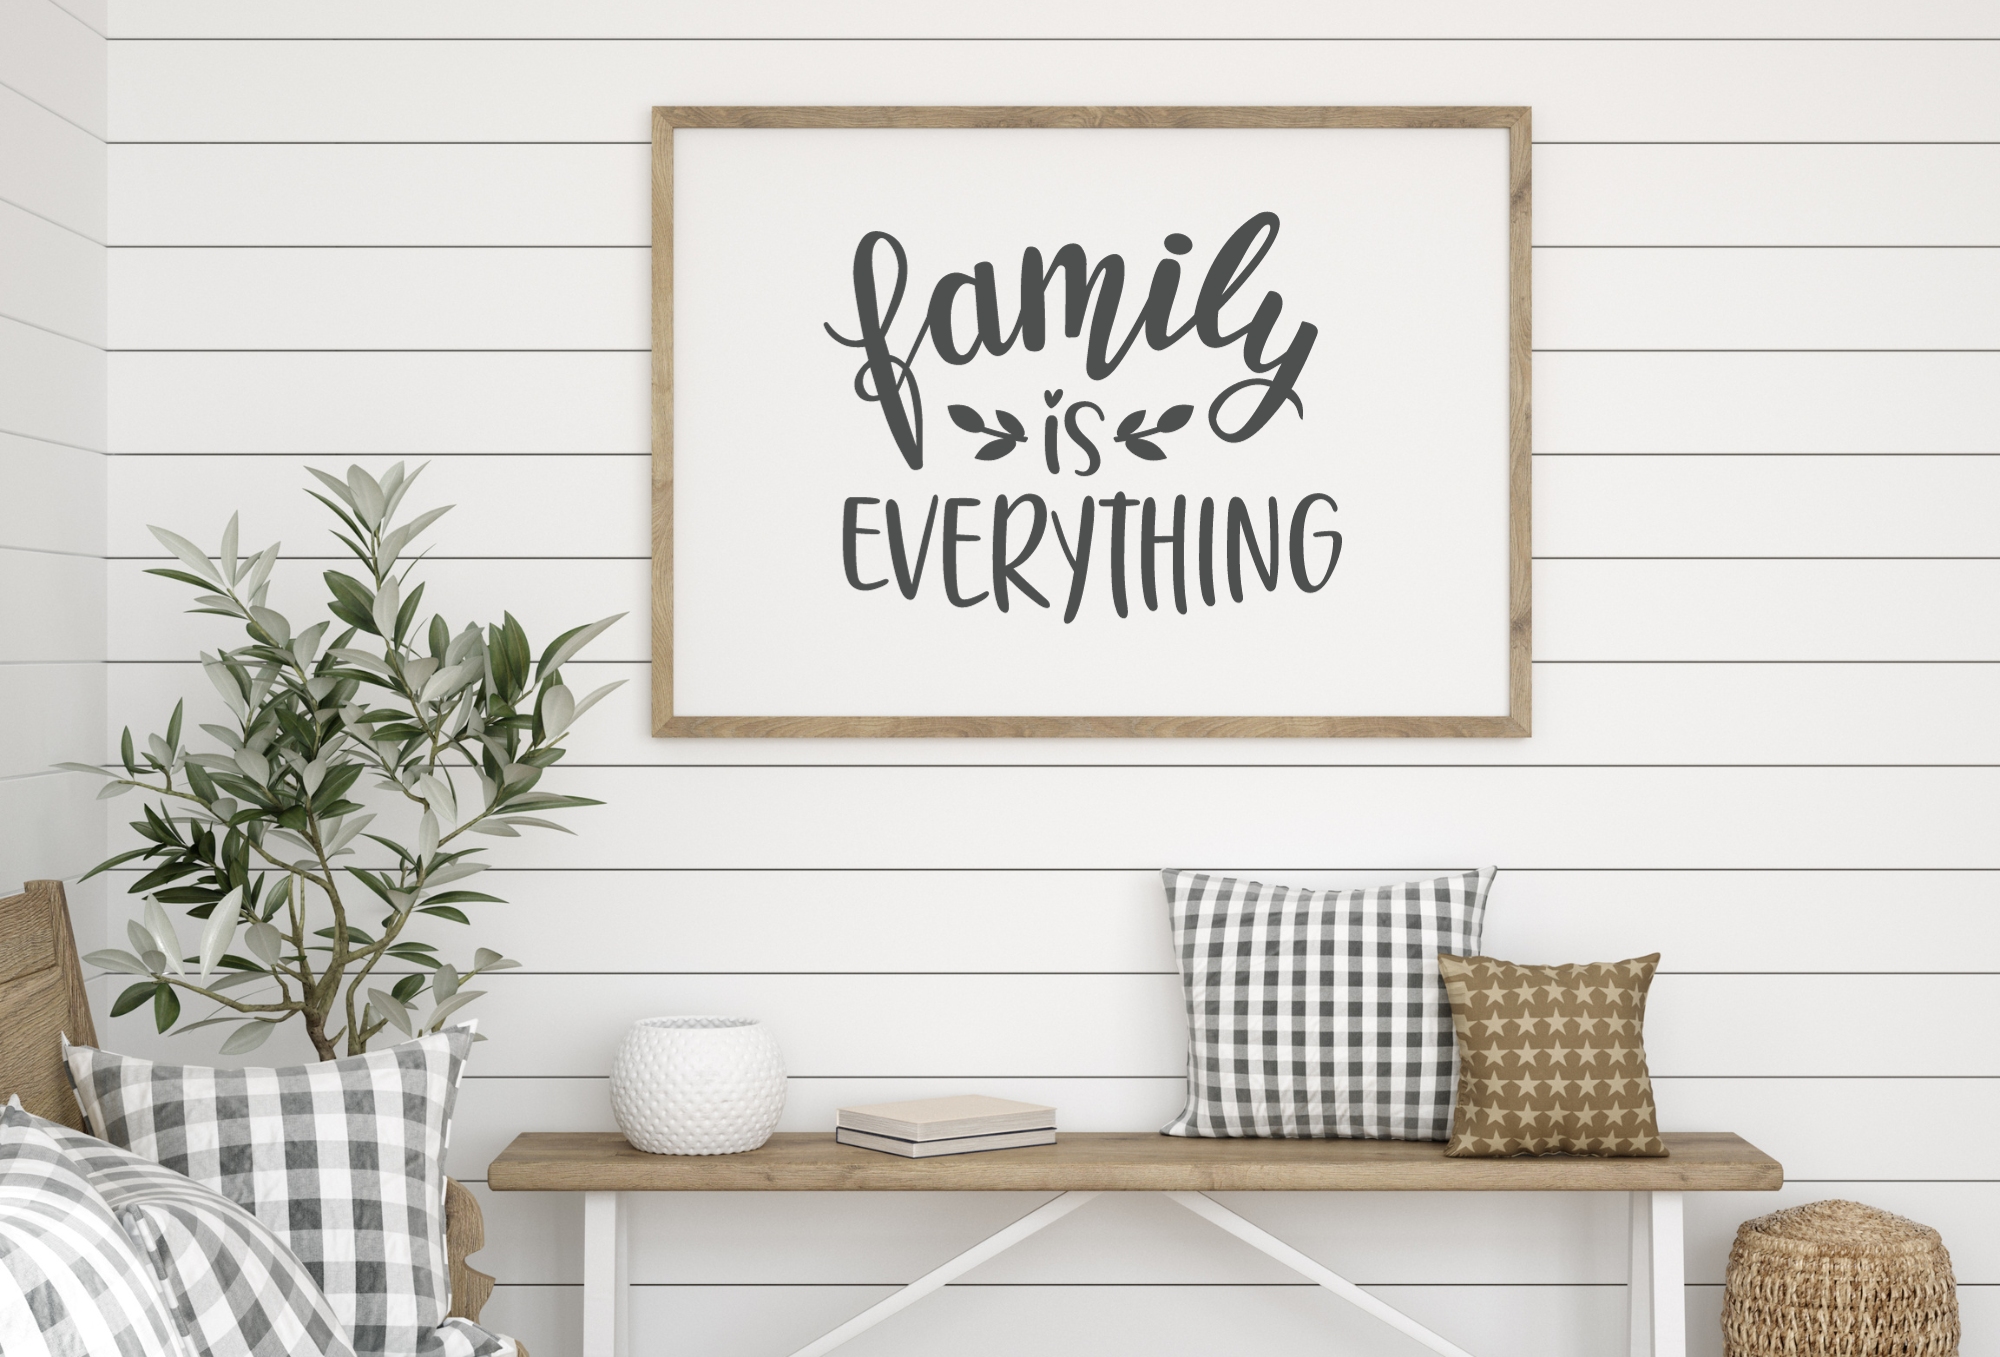 Farmhouse bench with pillows and wall frame that reads "Family is everything."